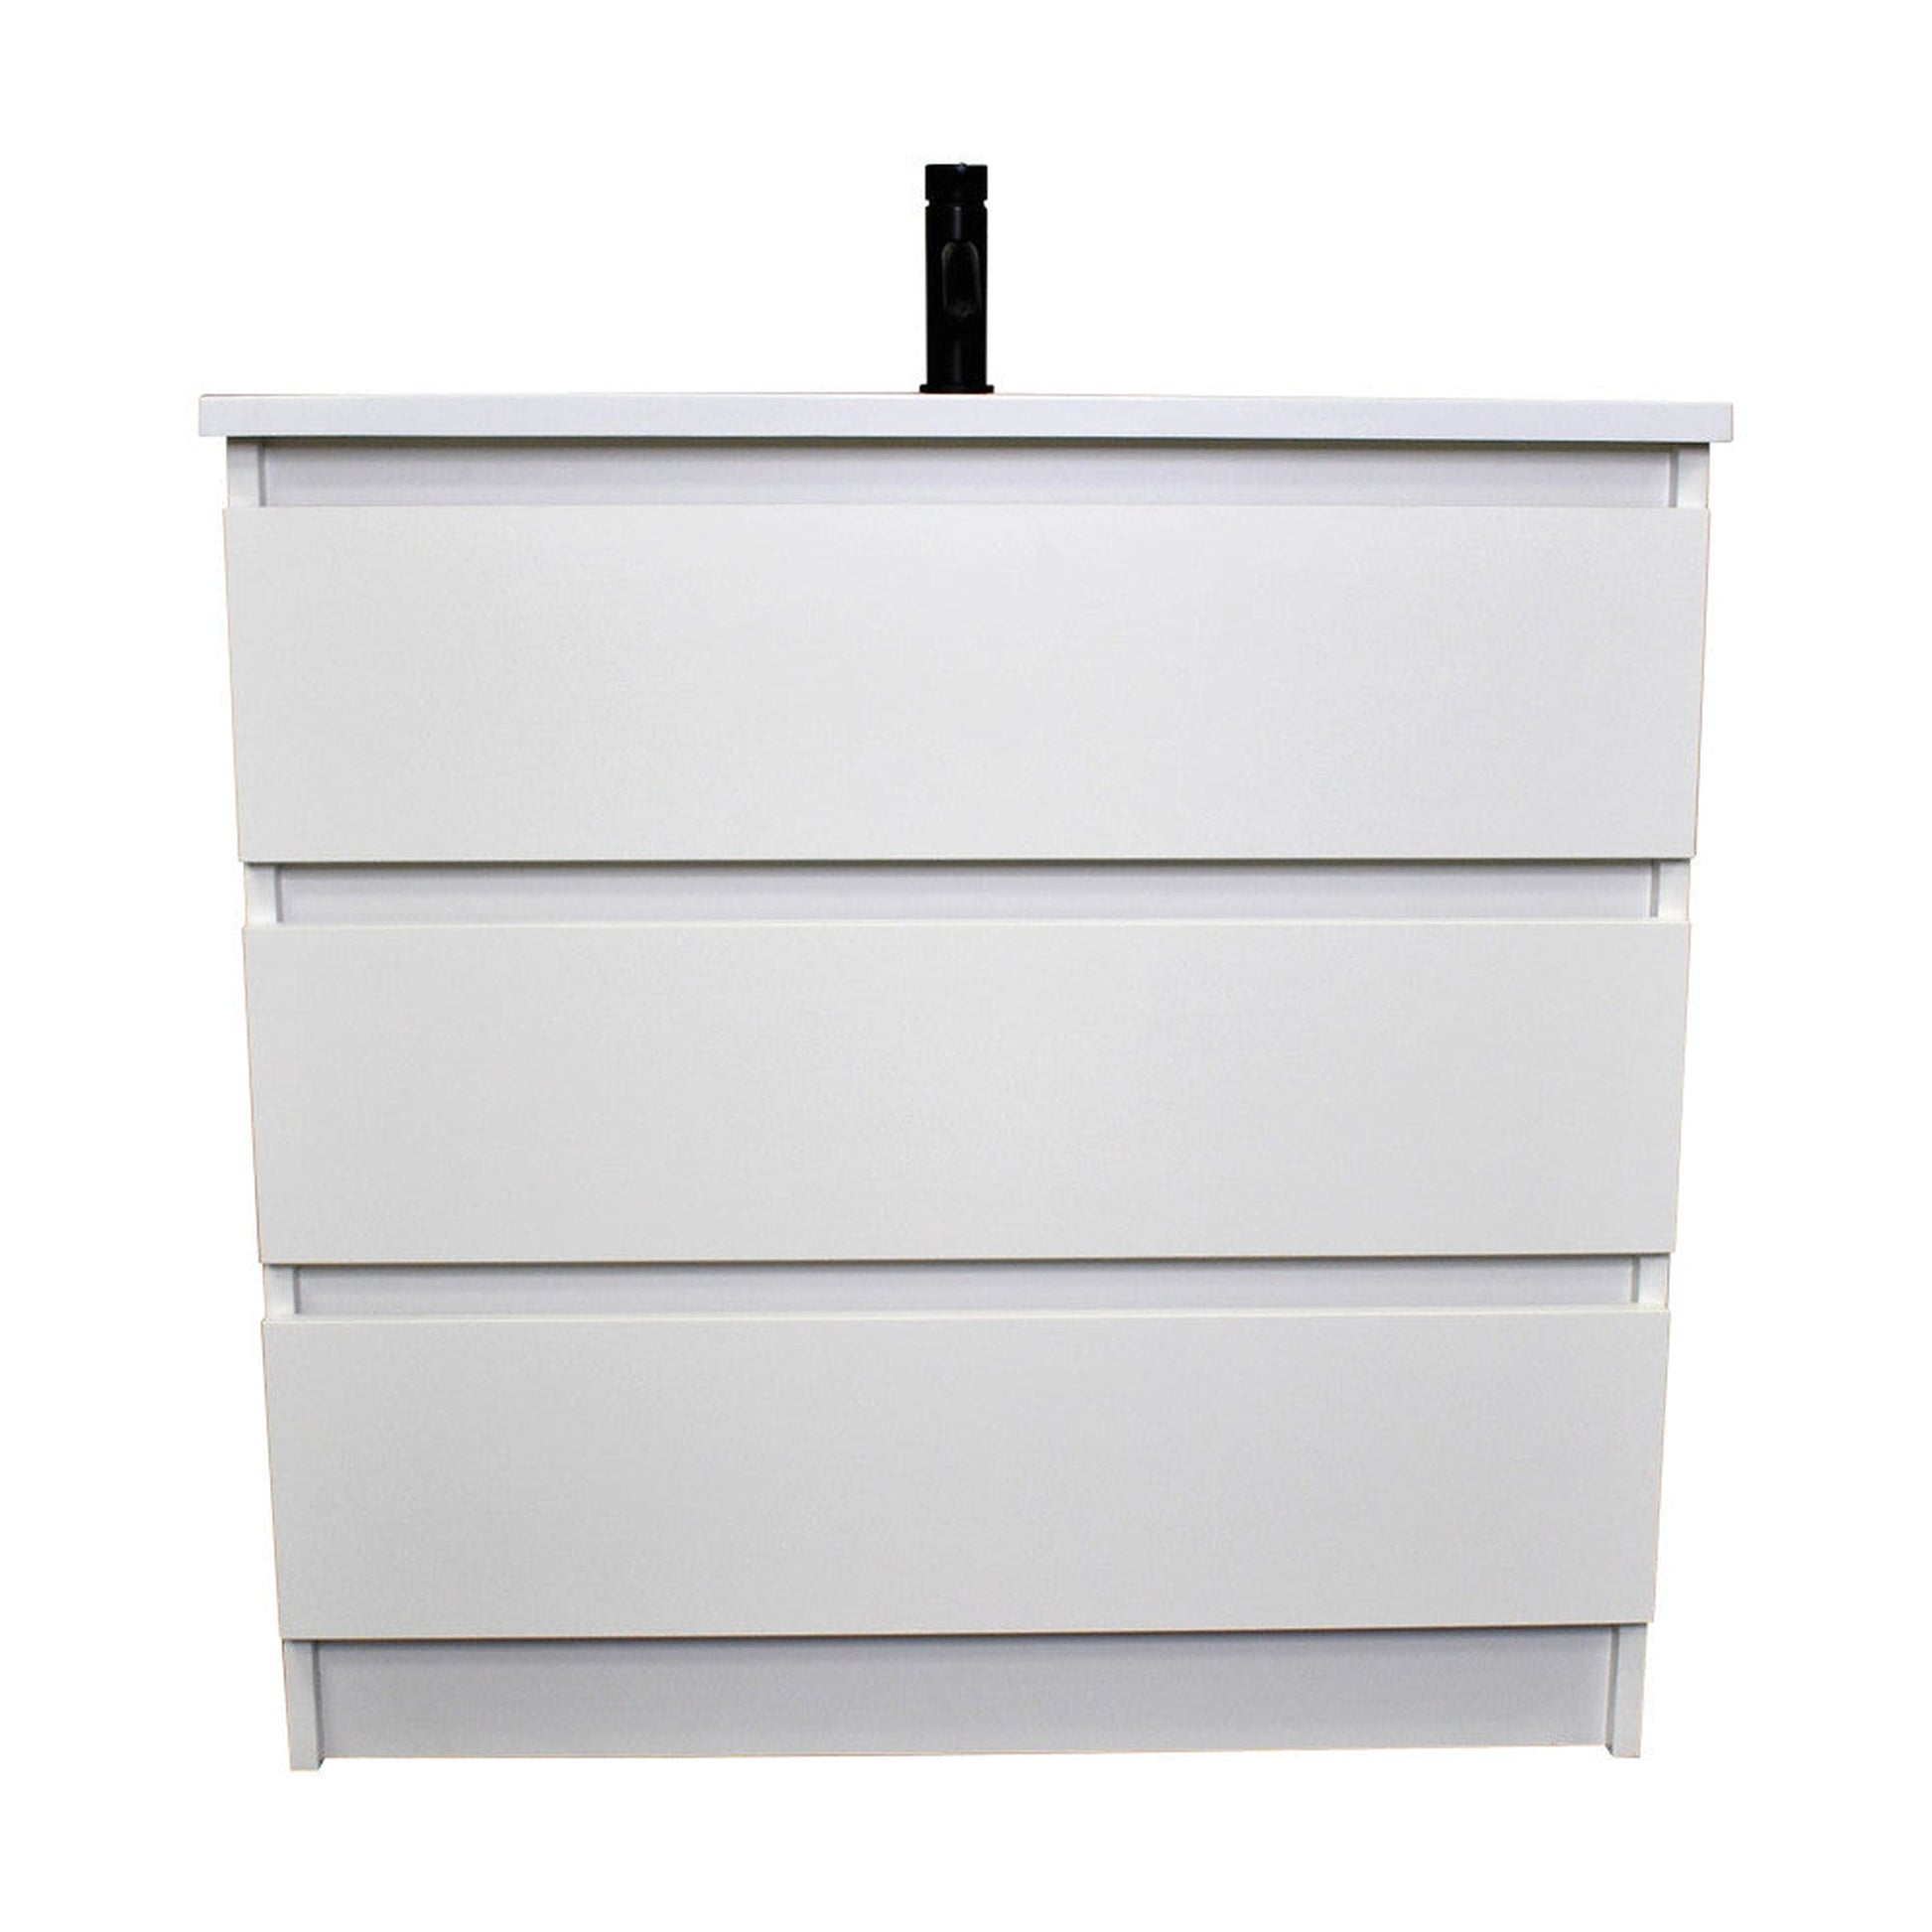 Volpa USA Pepper 36" x 20" White Modern Freestanding Bathroom Vanity With Acrylic Top, Integrated Acrylic Sink and drawers